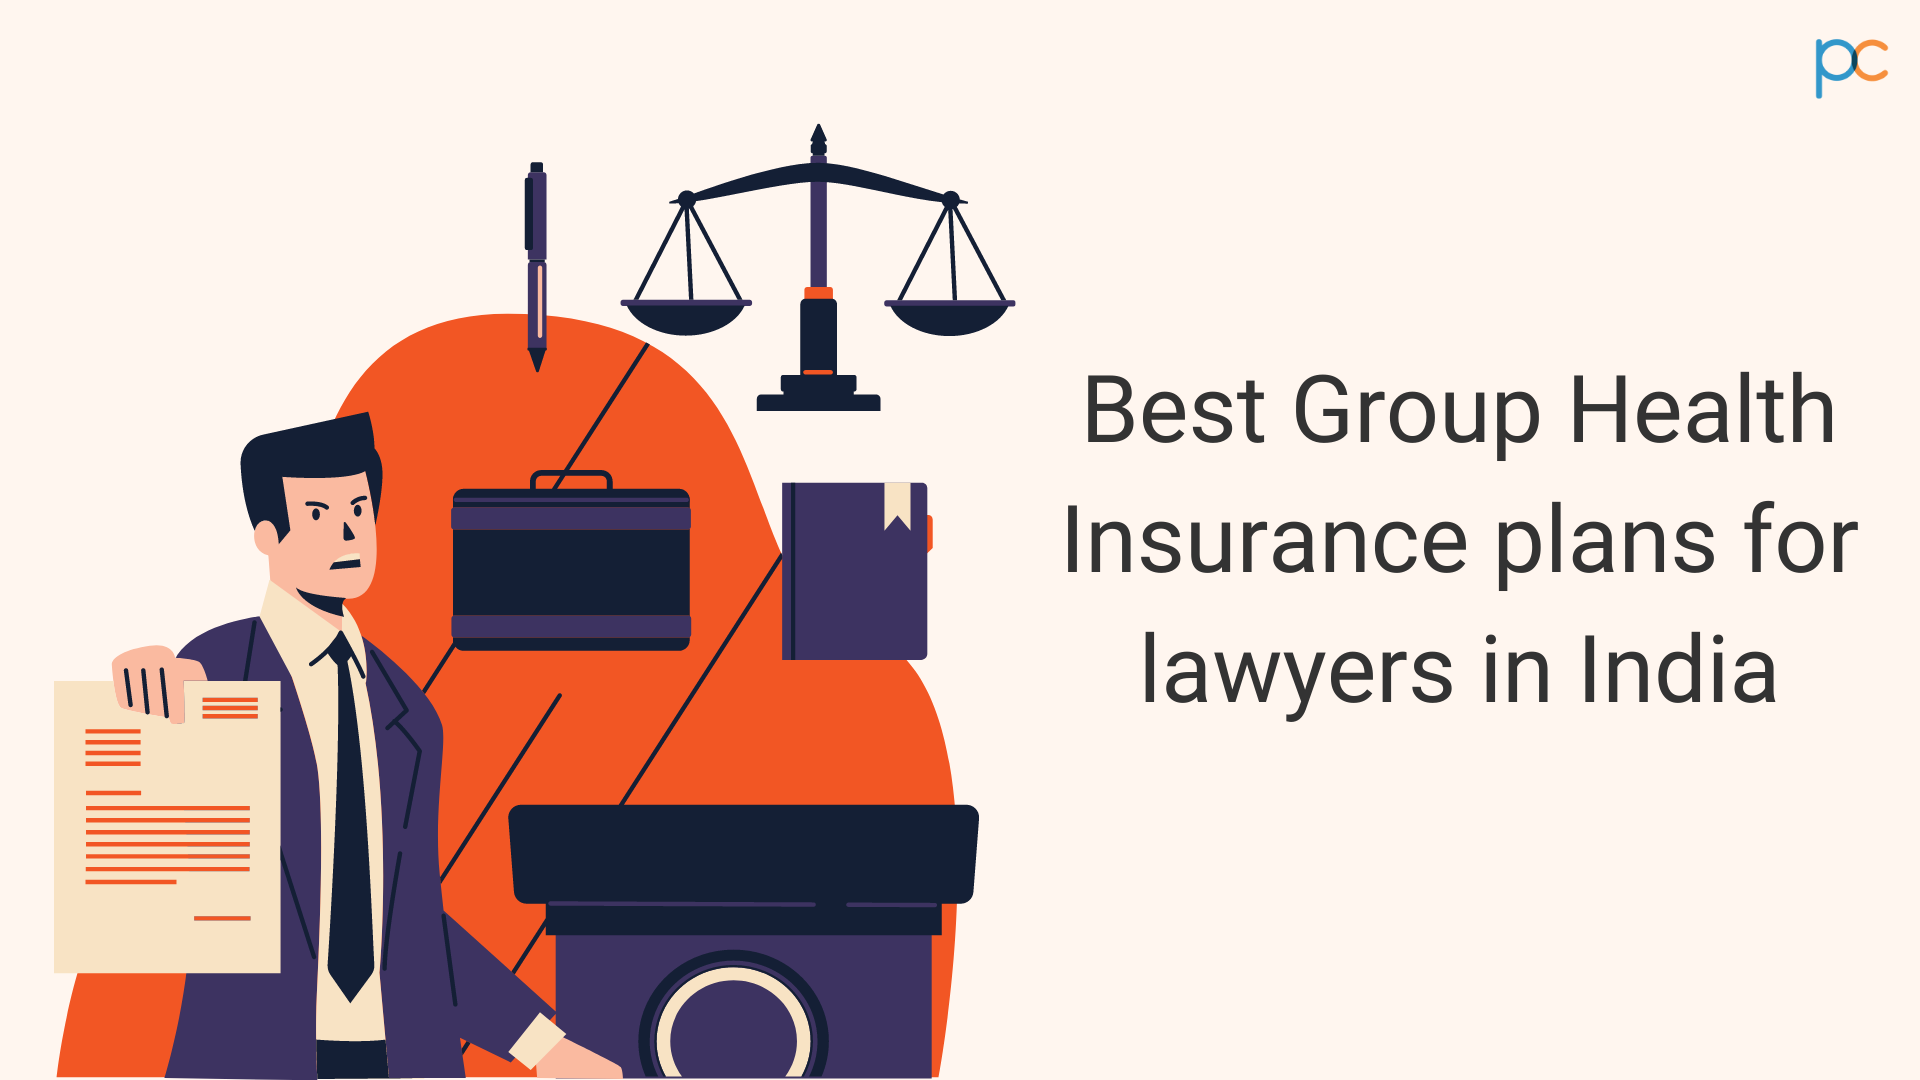 Best Group Health Insurance plans for lawyers in India